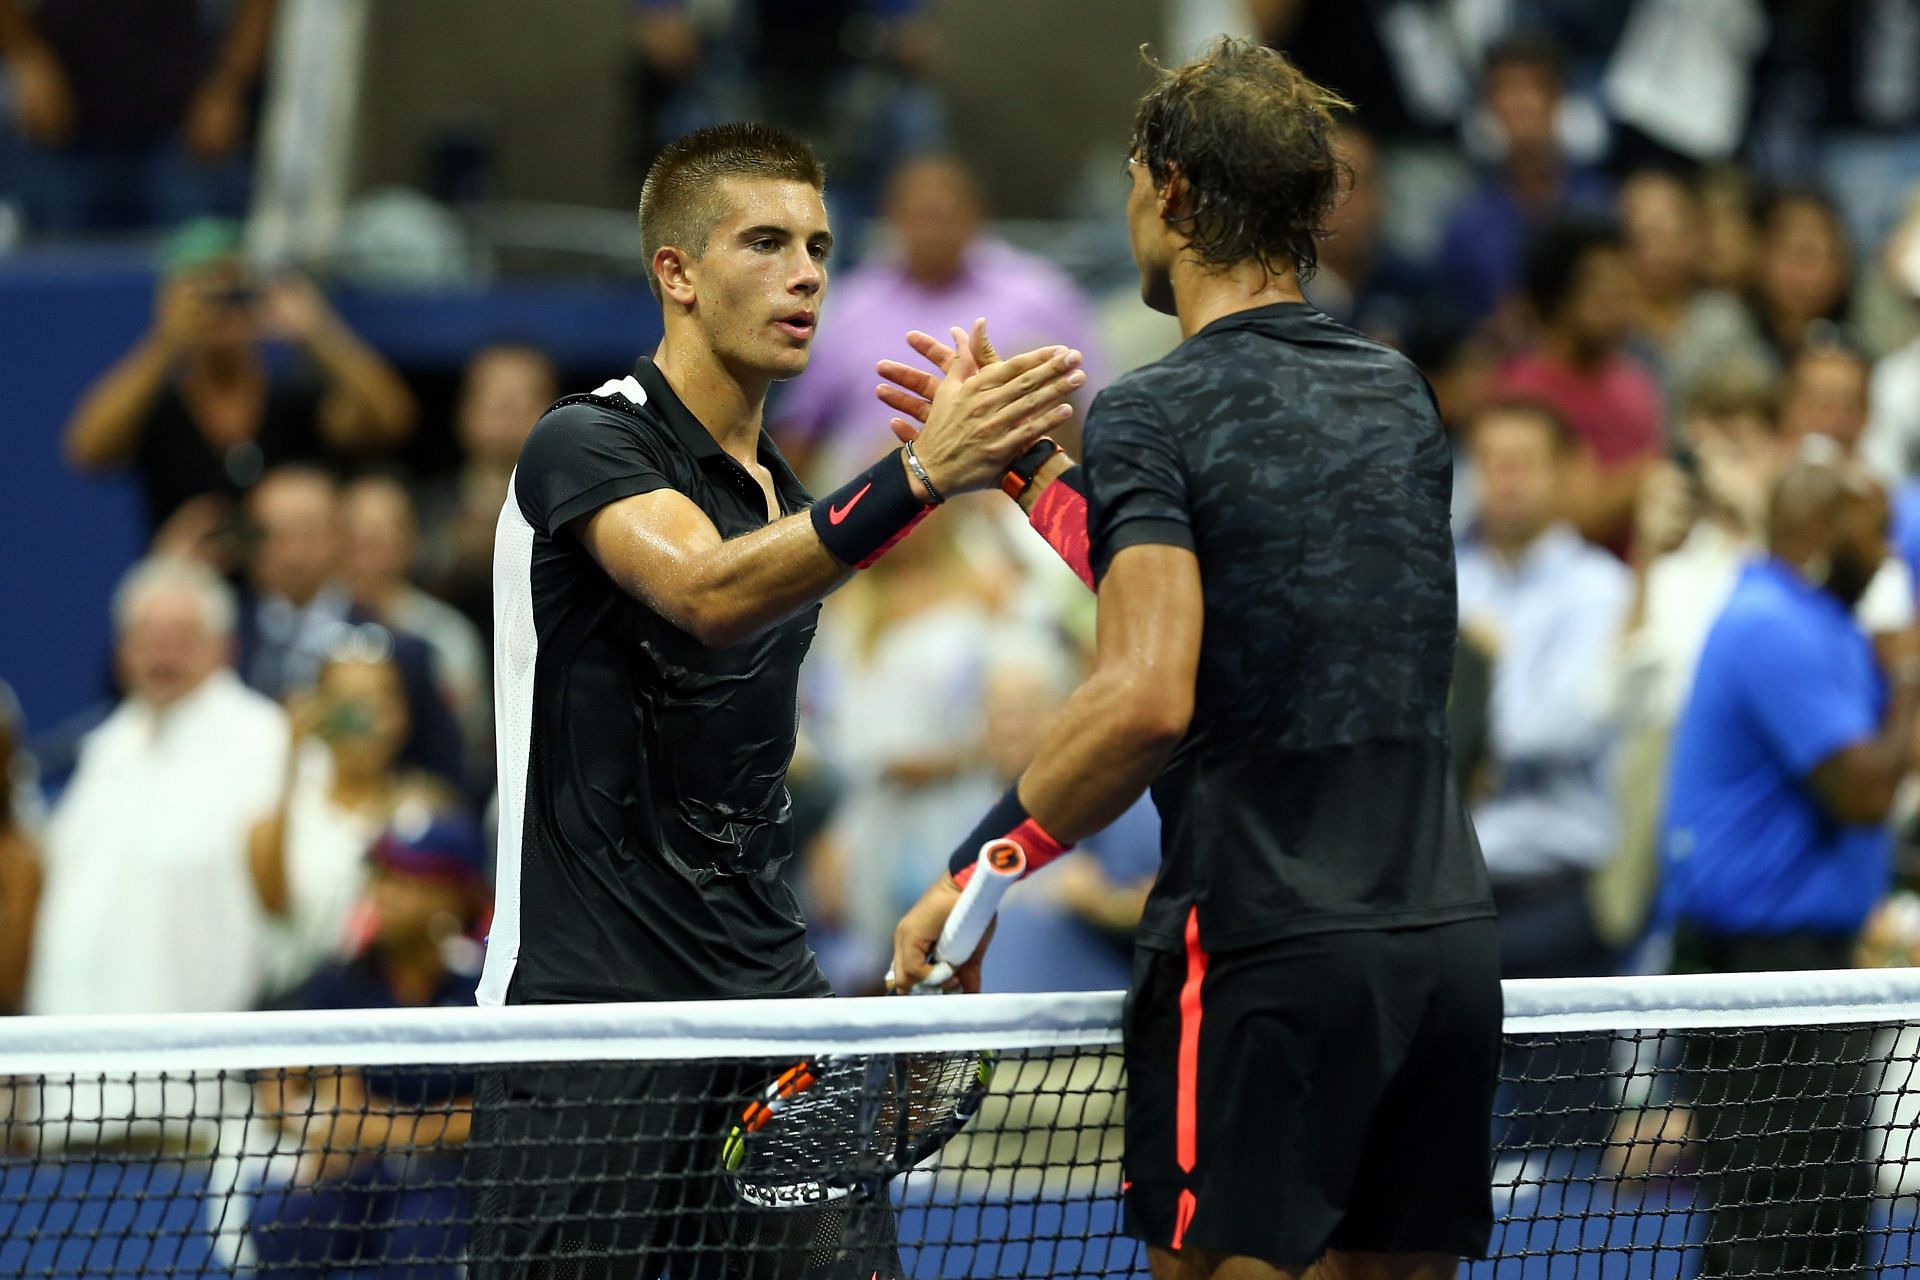 Rafael Nadal and Borna Coric after their match at the 2015 US Open